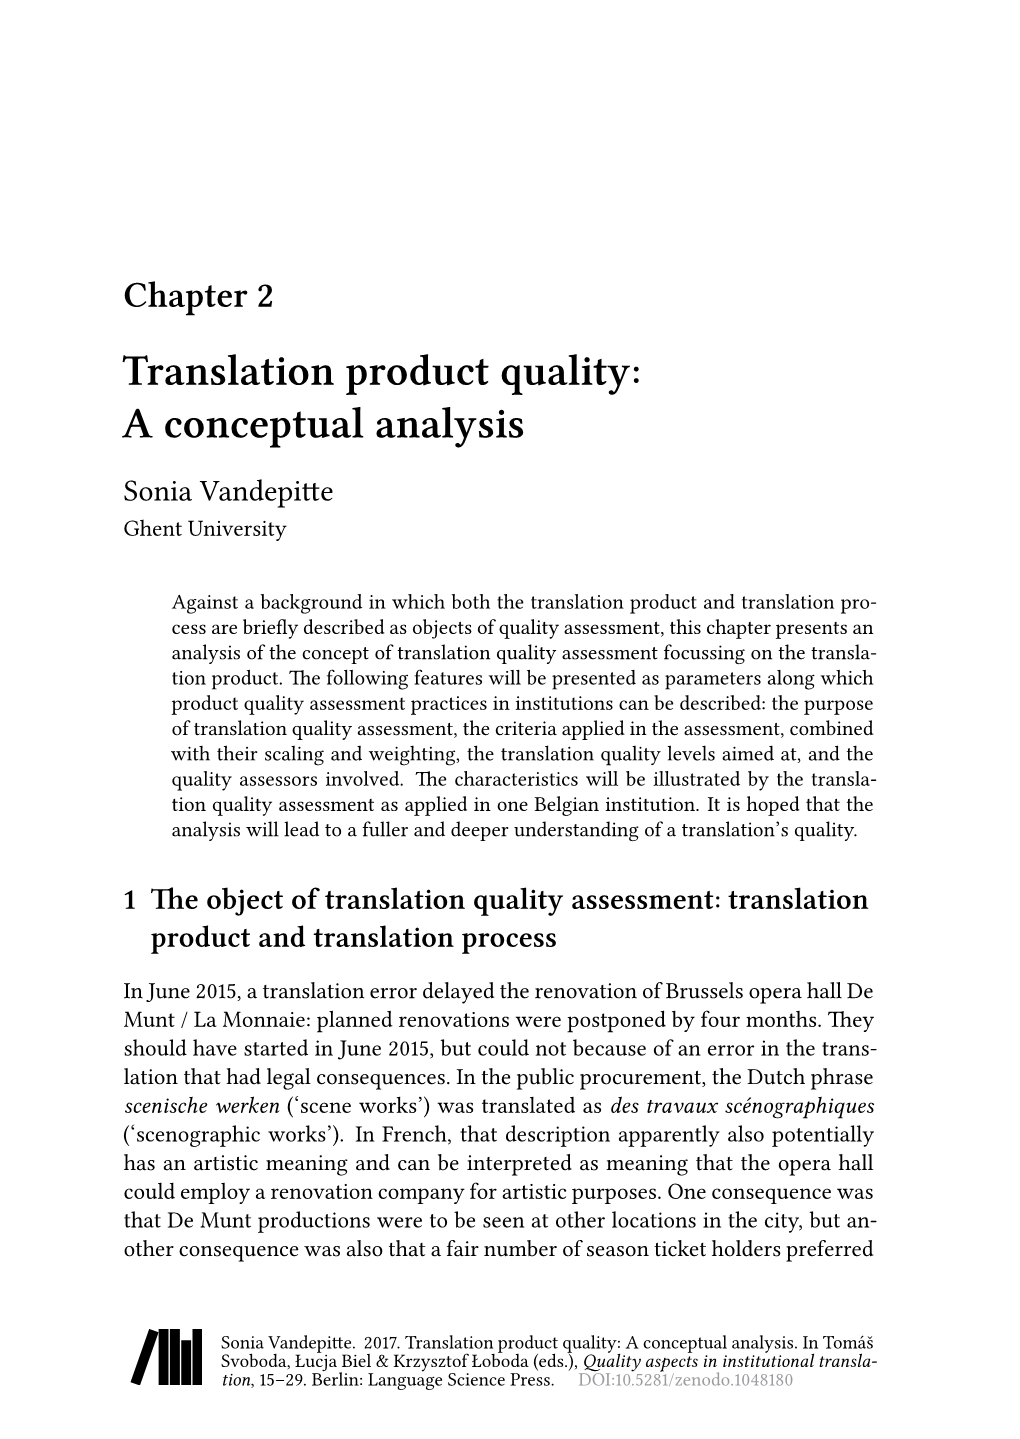 Chapter 2 Translation Product Quality: a Conceptual Analysis Sonia Vandepitte Ghent University